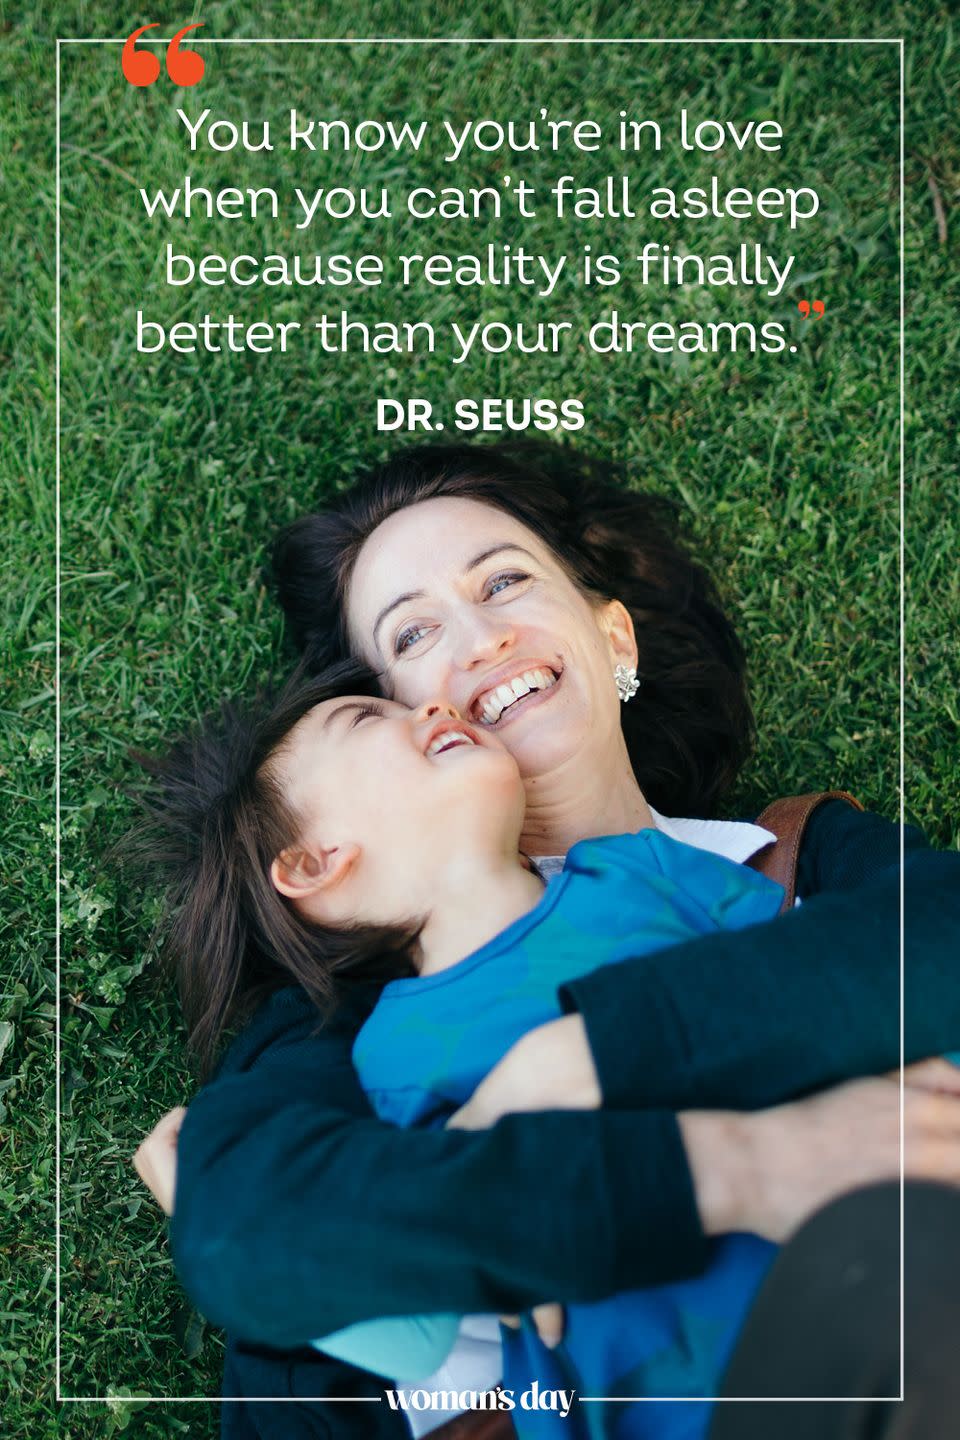 <p>"You know you're in love when you can't fall asleep because reality is finally better than your dreams." — Dr. Seuss</p>